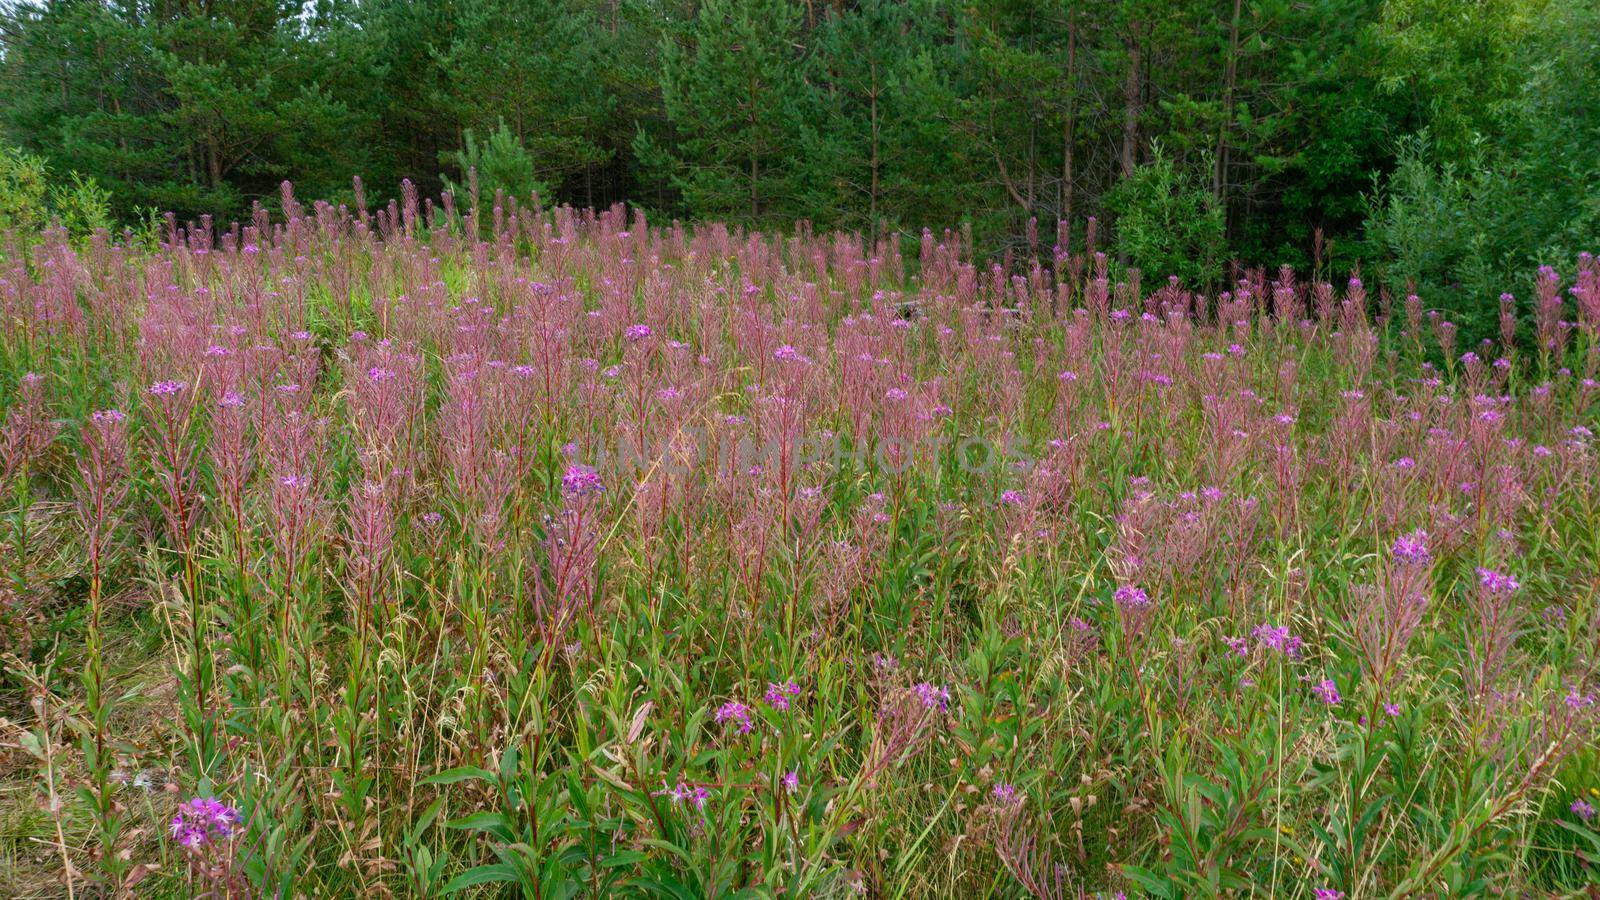 Thickets of fireweed angustifolia willow-herb in the wild. Fireweed does not bloom. by Asnia